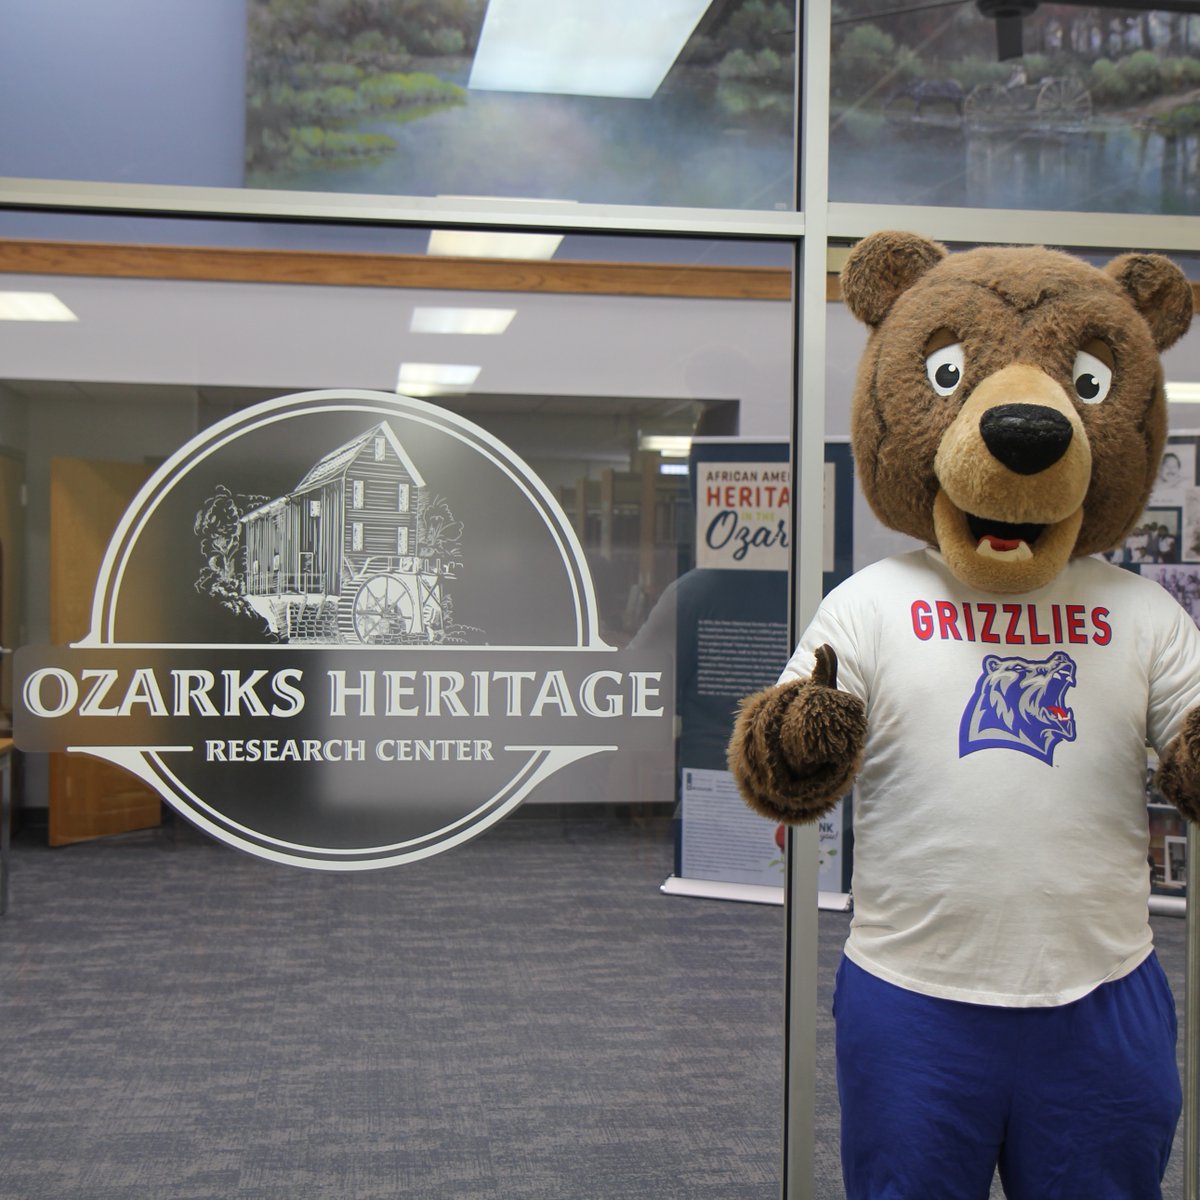 Happy National Library Week! Stop by the Missouri State University-West Plains Garnett Library to pick up a good book or visit the newly opened Ozarks Heritage Research Center. 📚